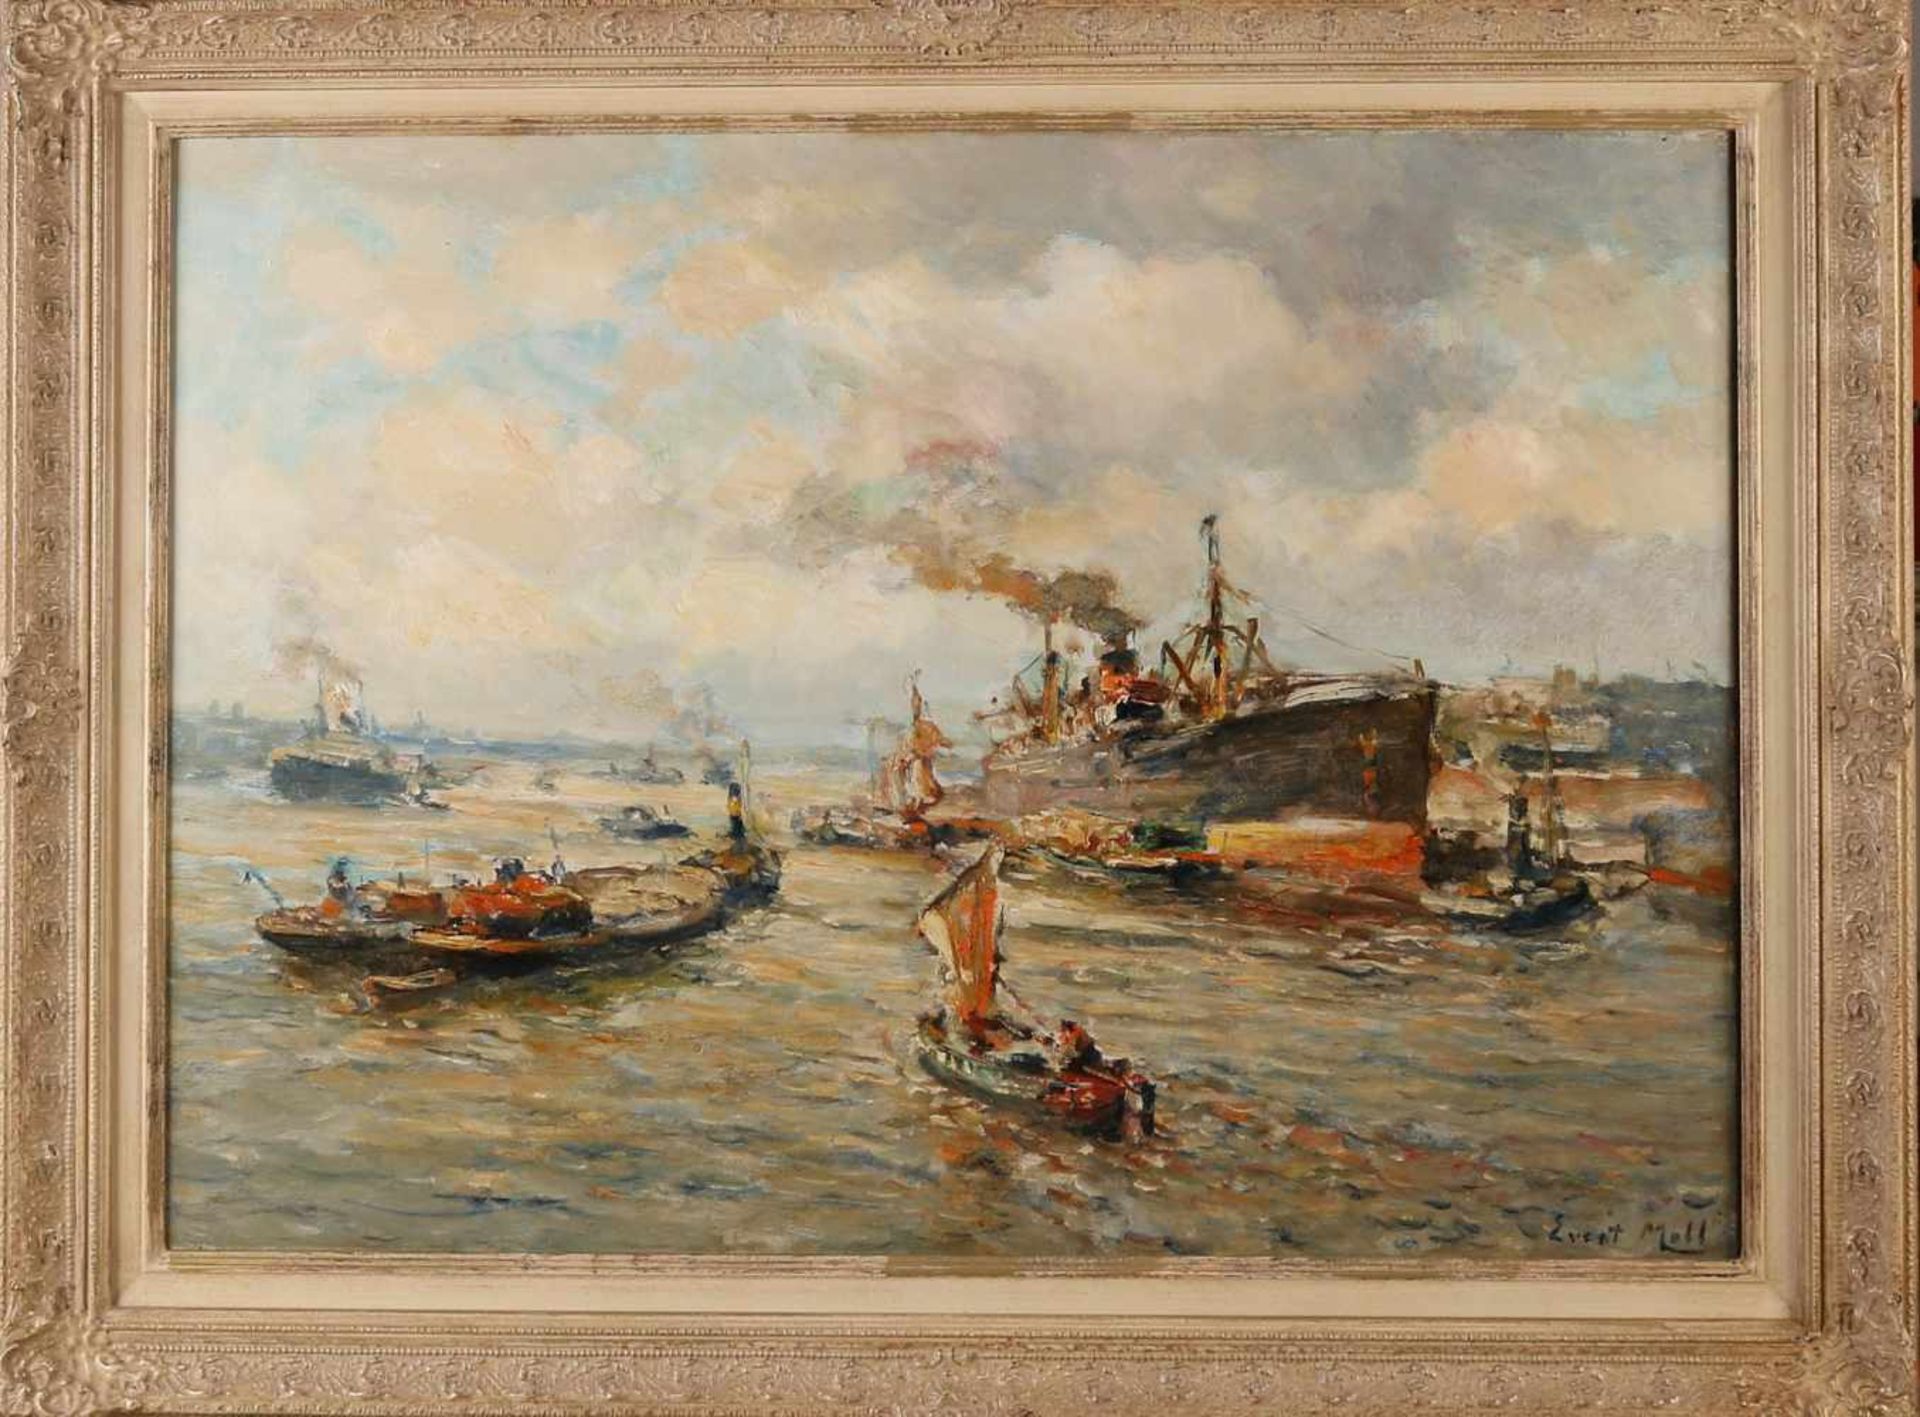 Evert Moll 1878-1955 Rotterdam port with many ships oil on canvas 60x80 cm in good condition.